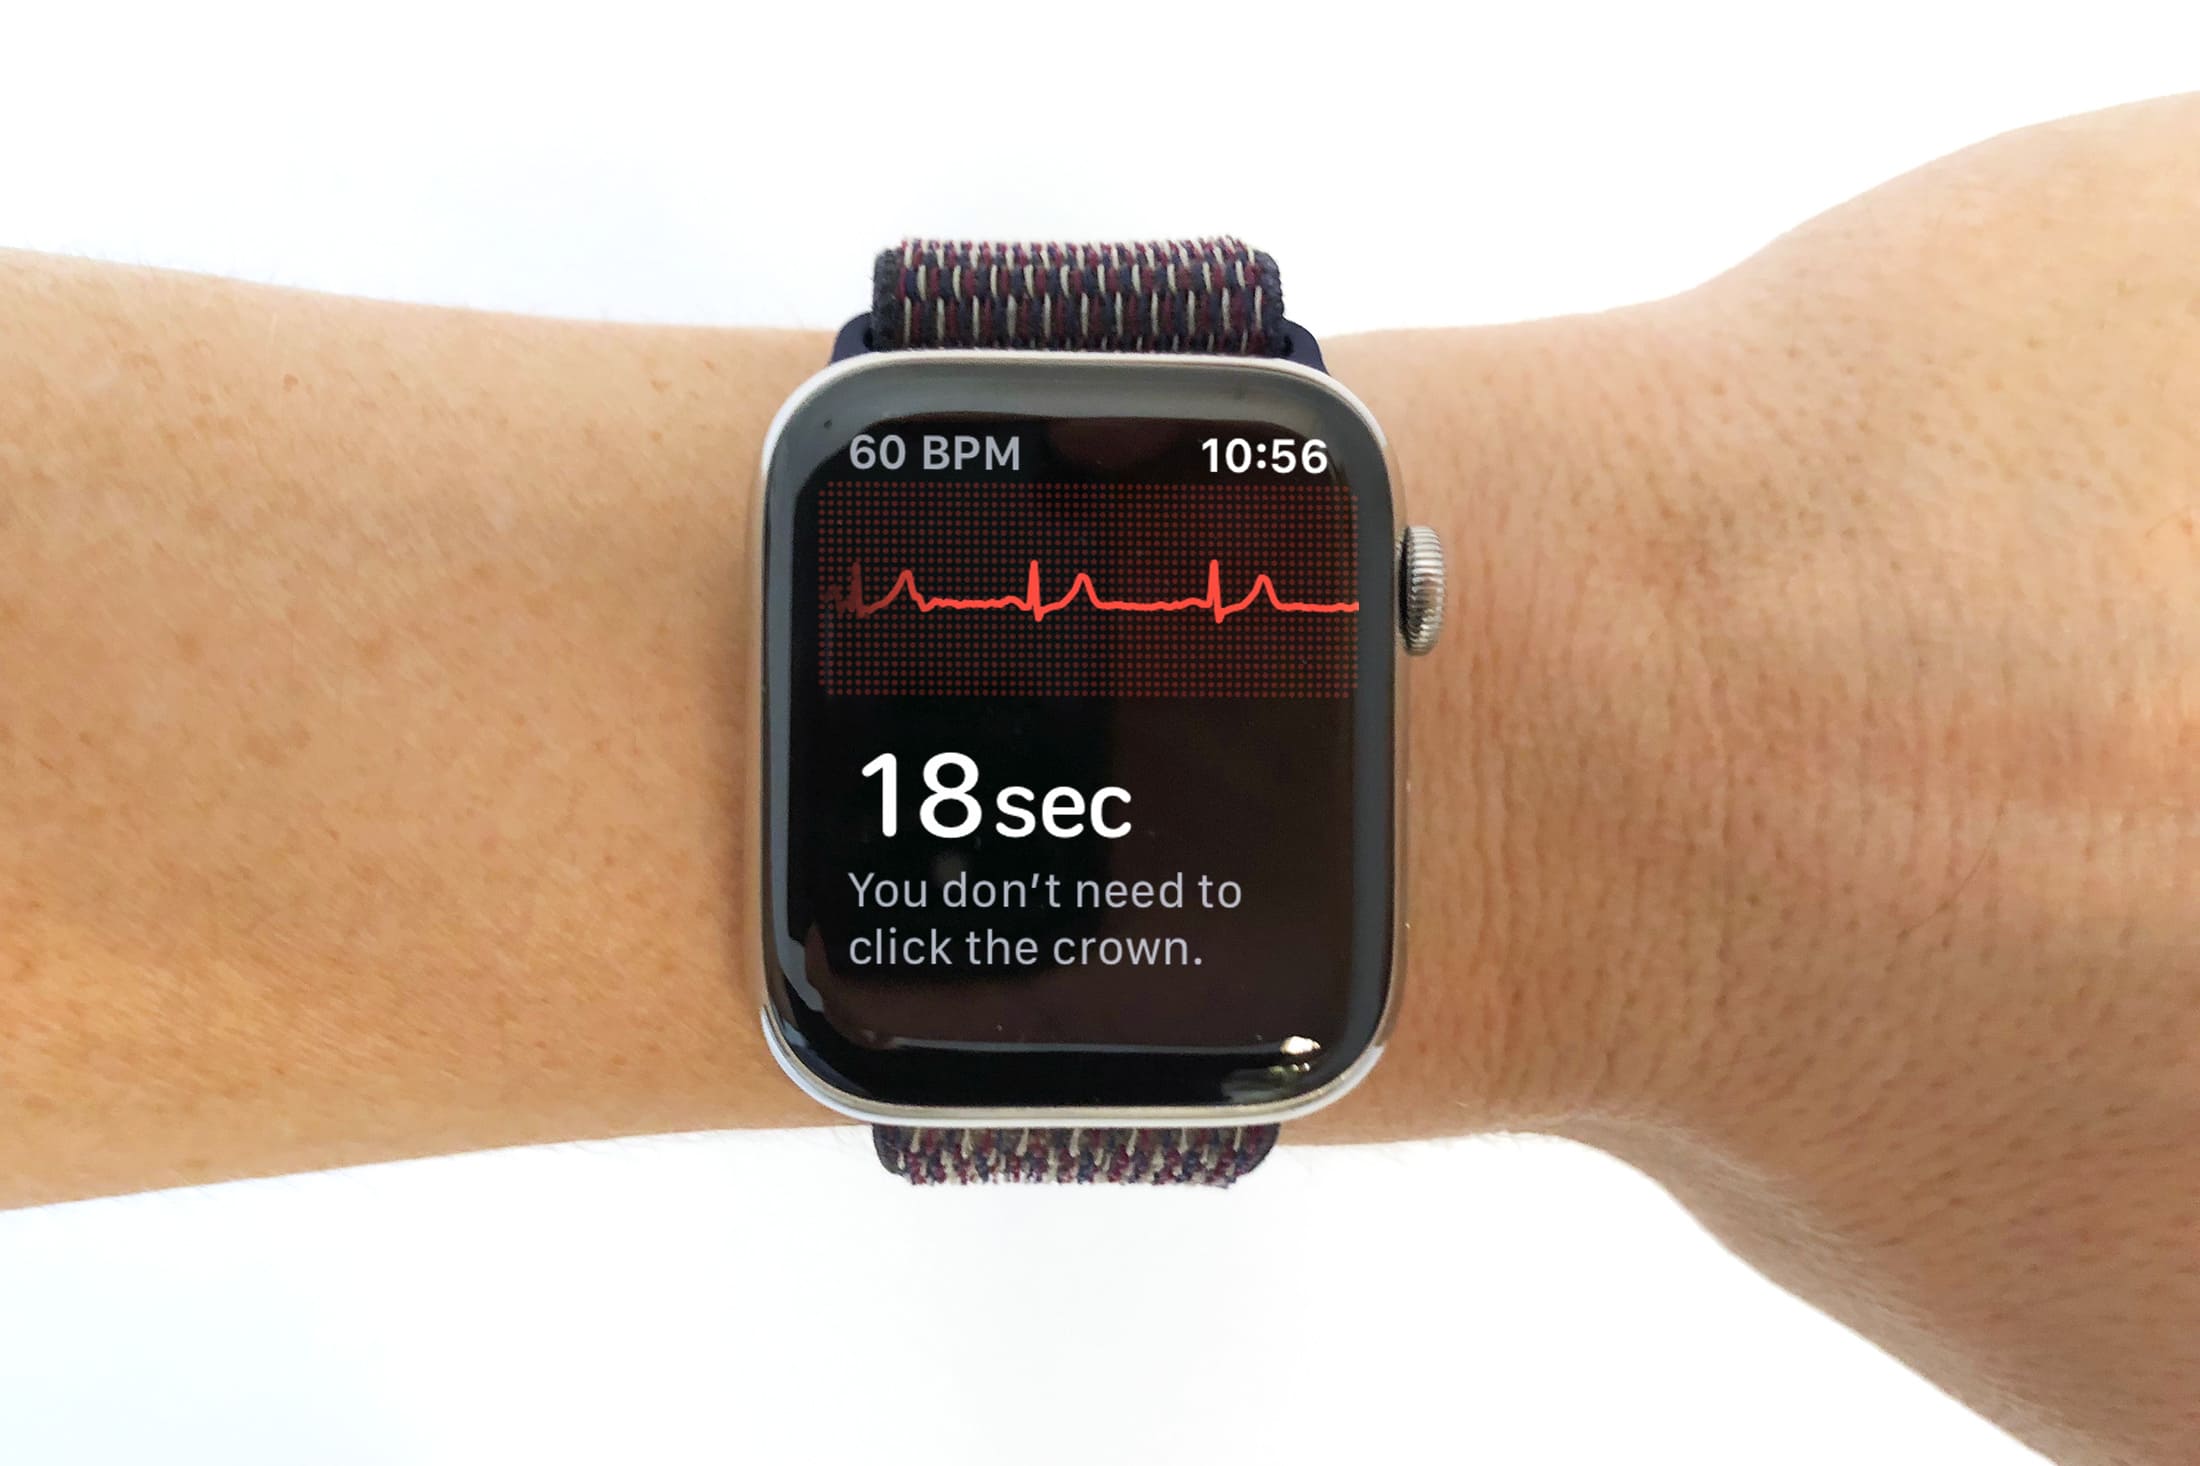 apple watch resting heart rate